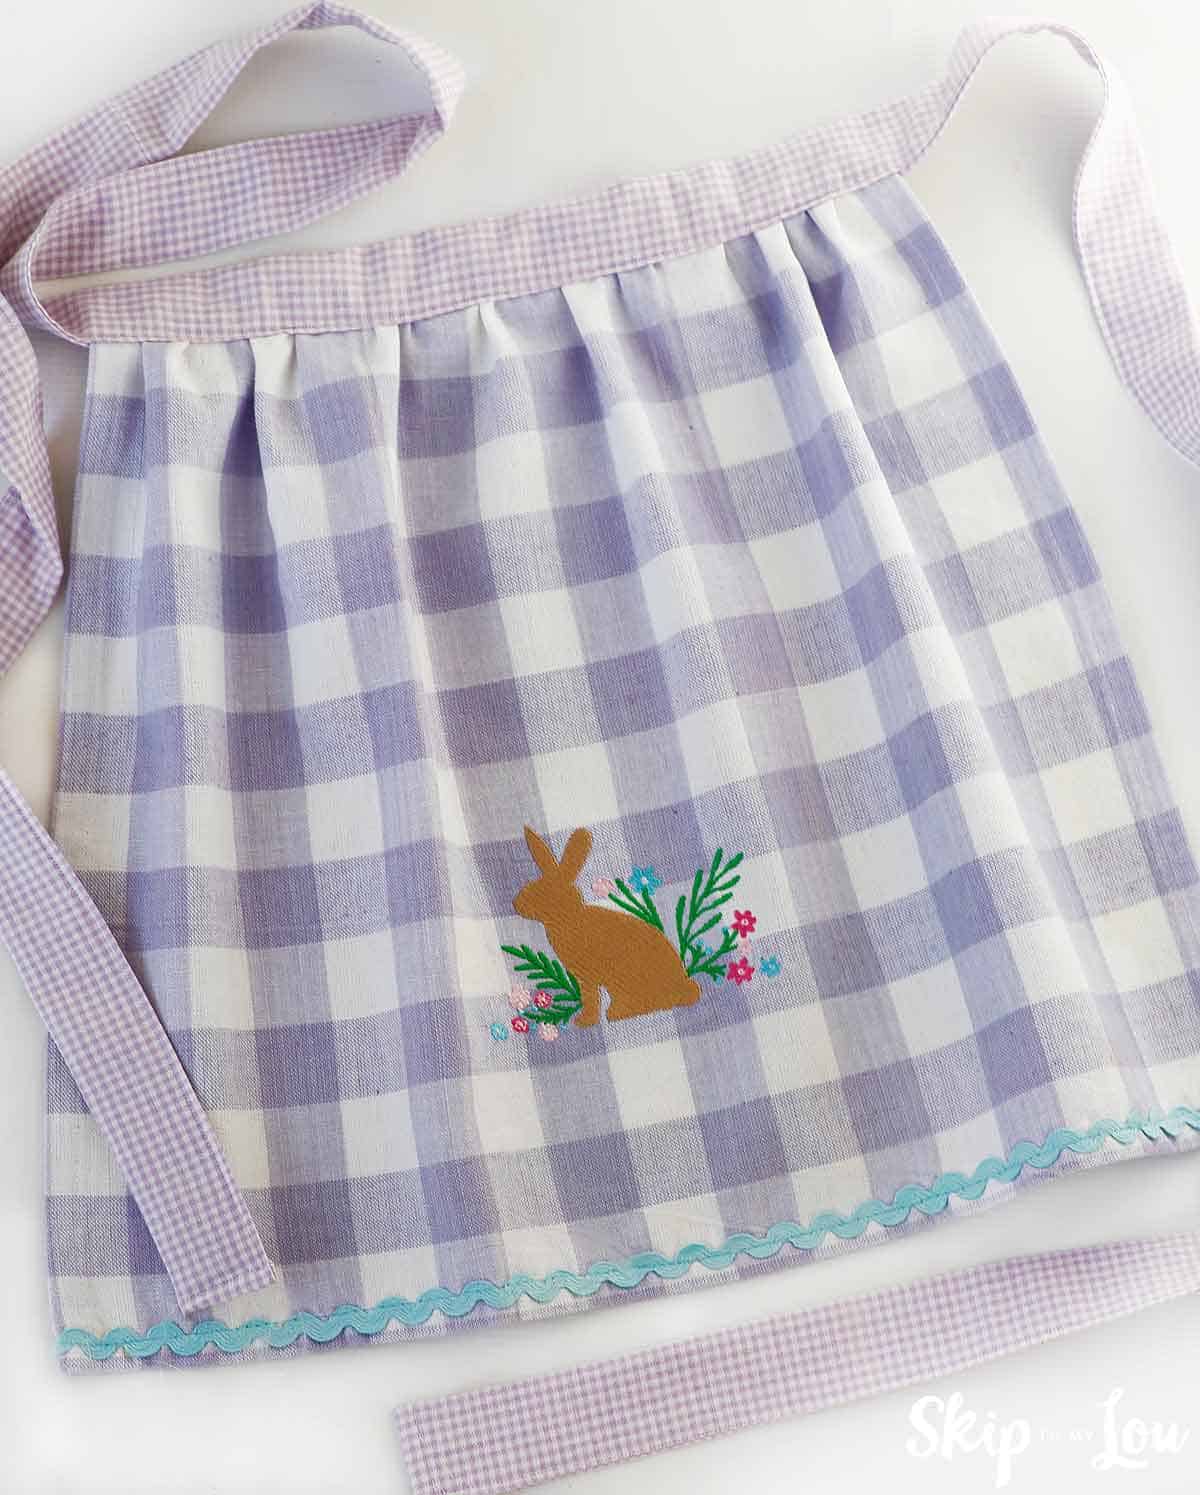 cute machine embroidered bunny with flowers on checkered purple apron